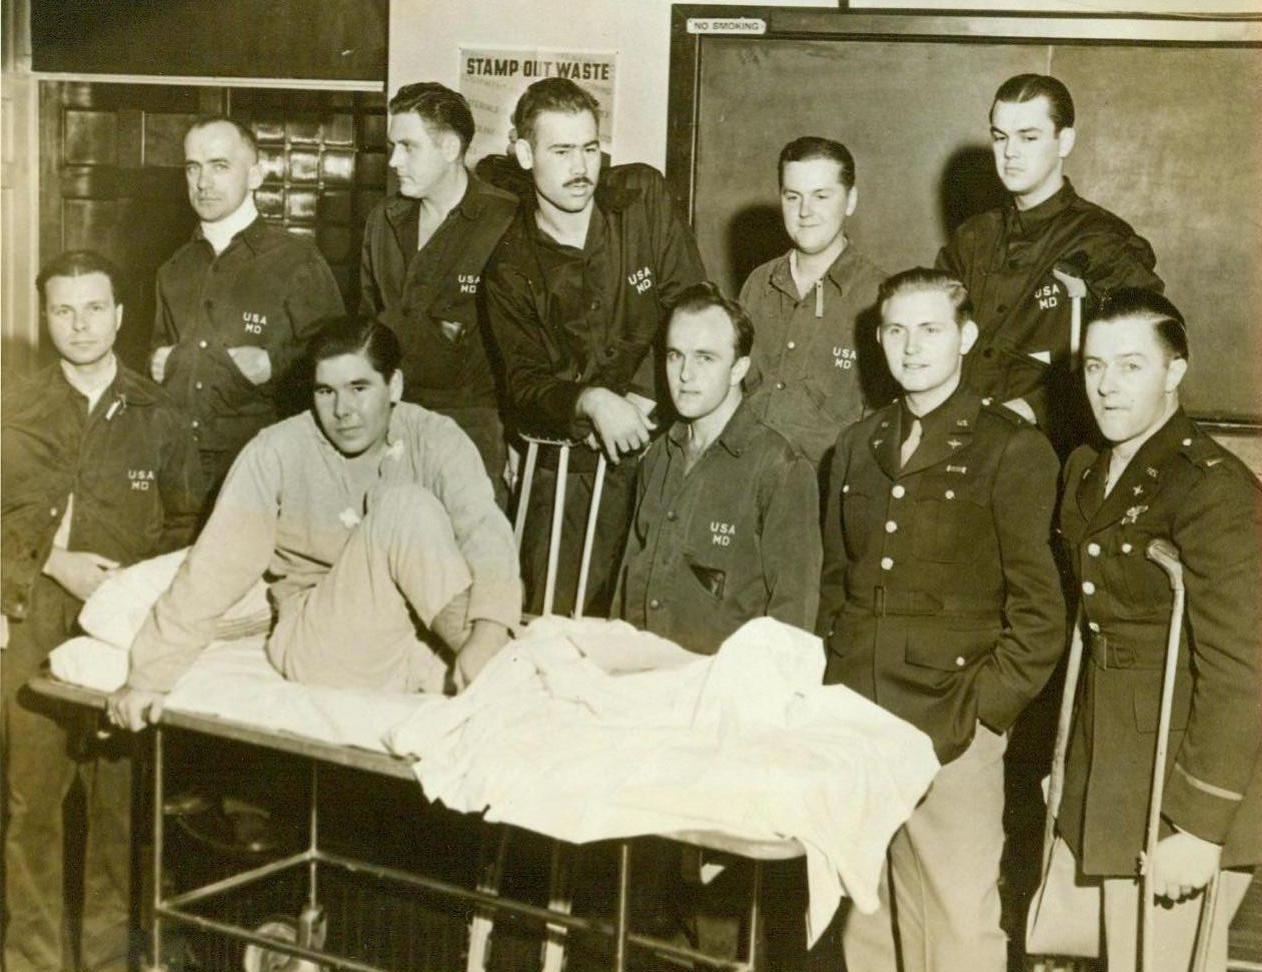 Back From Germany. Washington, D.C. – Ten of the 14 wounded American soldiers who were repatriated from Germany in an exchange of sick and wounded are interviewed at Walter Reed Hospital. Group around Corp. Rodney M. Graham (on cot) are (left to right) Sgt. Edwin N. Nelson, Marshall, Minn.; T/Sgt. Frank J. Bartnicki, Moosic, Pa.; S/Sgt. Milton K. Williams, North Platte, Neb.; Pvt. Robert M. Scott, Greensboro, N.C.; Pfc. Herbert L Ehrich, Brooklyn, N.Y.; Pvt. Leroy M. Keith, Denver, Pa,; First Lieut. Albert W. Glass, Jr., Macon, Ga.; S/Sgt. Norman C. Goodwin, Haverhill, Mass., and Second Lieut. Glen M. Harrington, Ogden, Utah. (ACME);